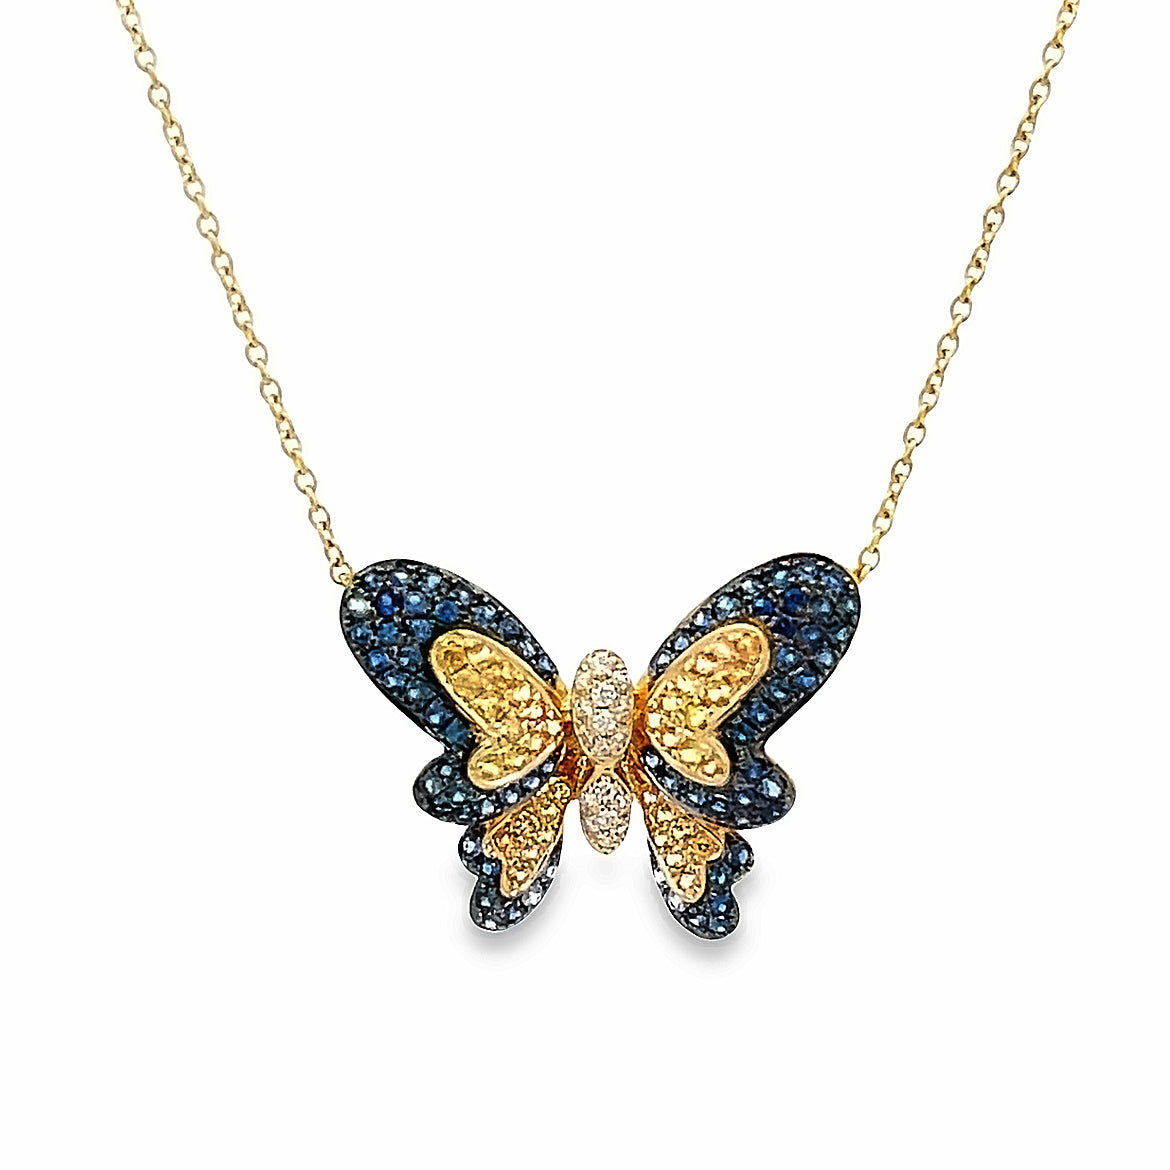 18K GOLD BUTTERFLY NECKLACE WITH YELLOW AND BLUE SAPPHIRE